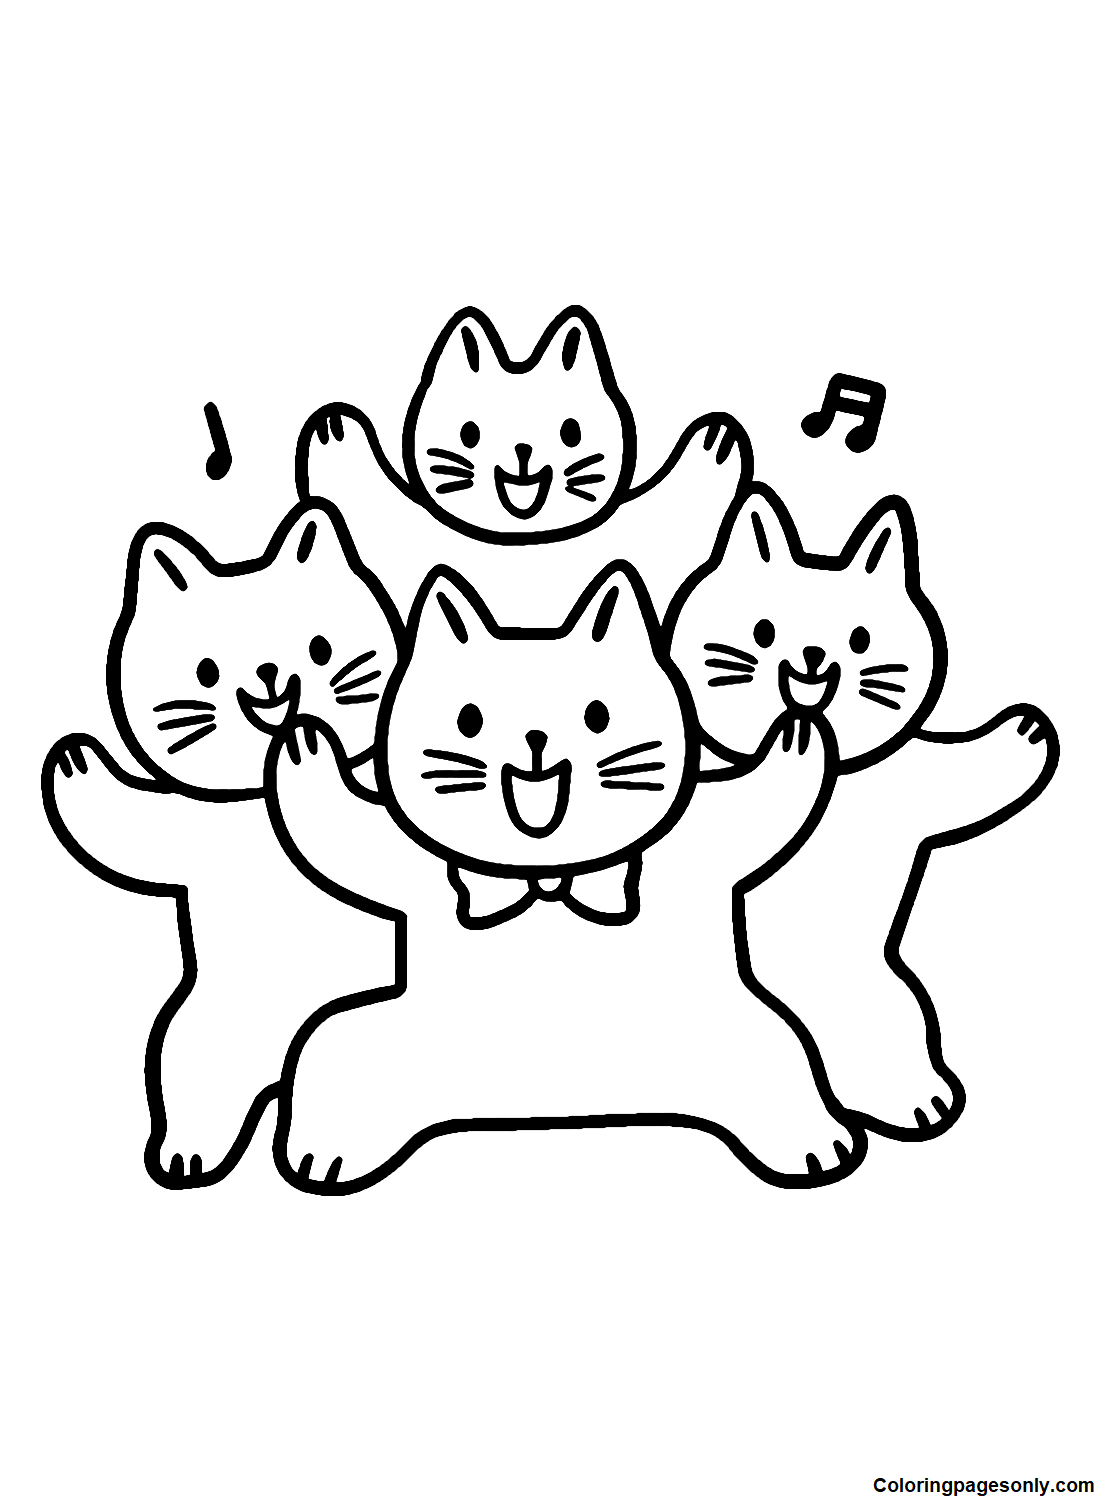 Funny Cats Dancing Coloring Page